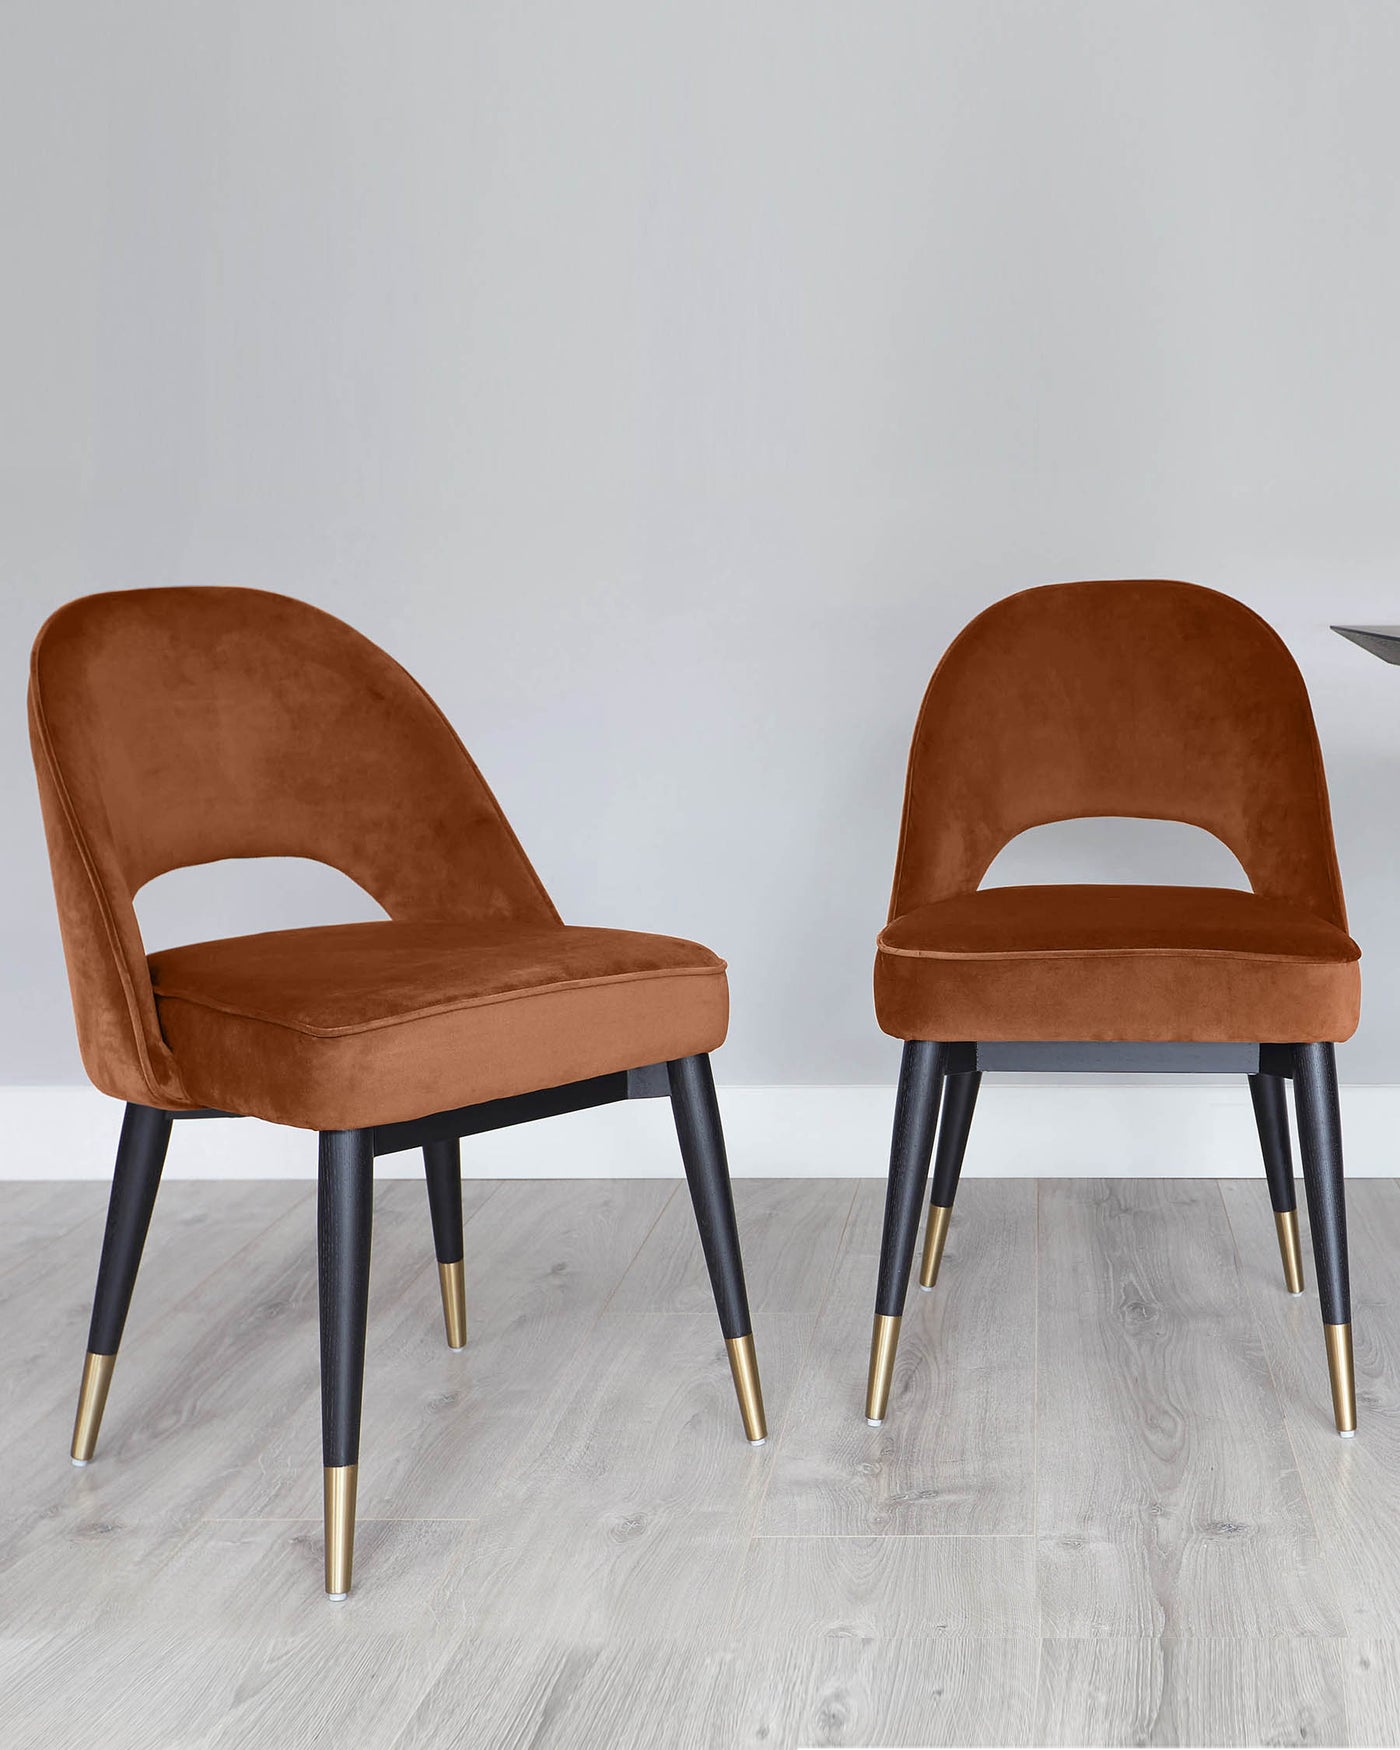 Two contemporary velvet dining chairs with a rich caramel hue, featuring curved backrests and cushioned seats, supported by sleek, tapered legs in a black finish with elegant gold-tone metal tips.